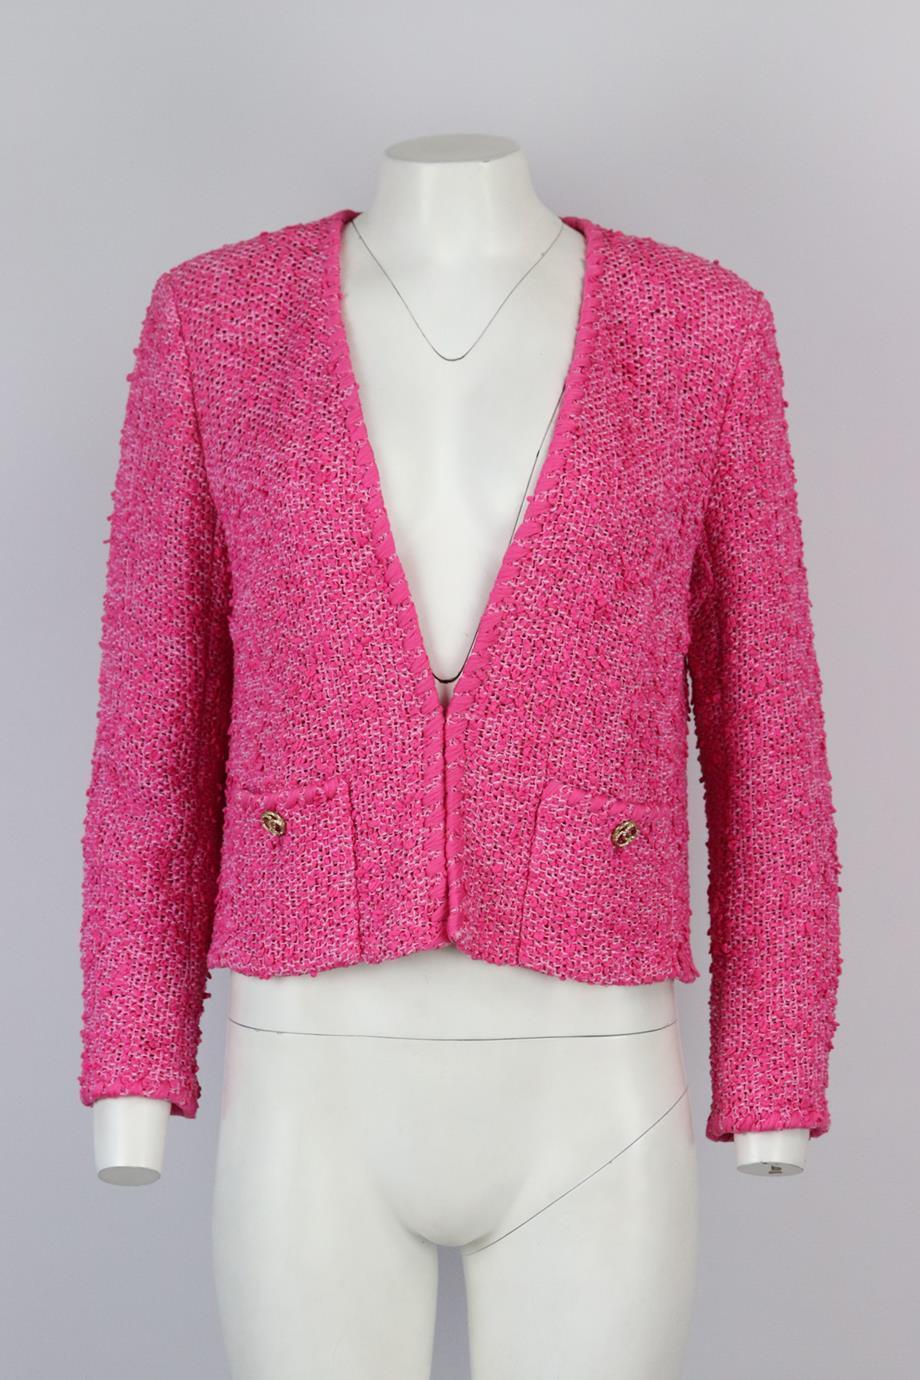 Chanel 2021 cotton tweed tweed jacket. Tonal-pink. Long sleeve, v-neck. Hook and eye fastening at front. 81% Cotton, 13% acrylic, 3% polyester, 3% polyamide; lining: 100% silk. Size: FR 42 (UK 14, US 10, IT 46). Shoulder to shoulder: 16.5 in. Bust: